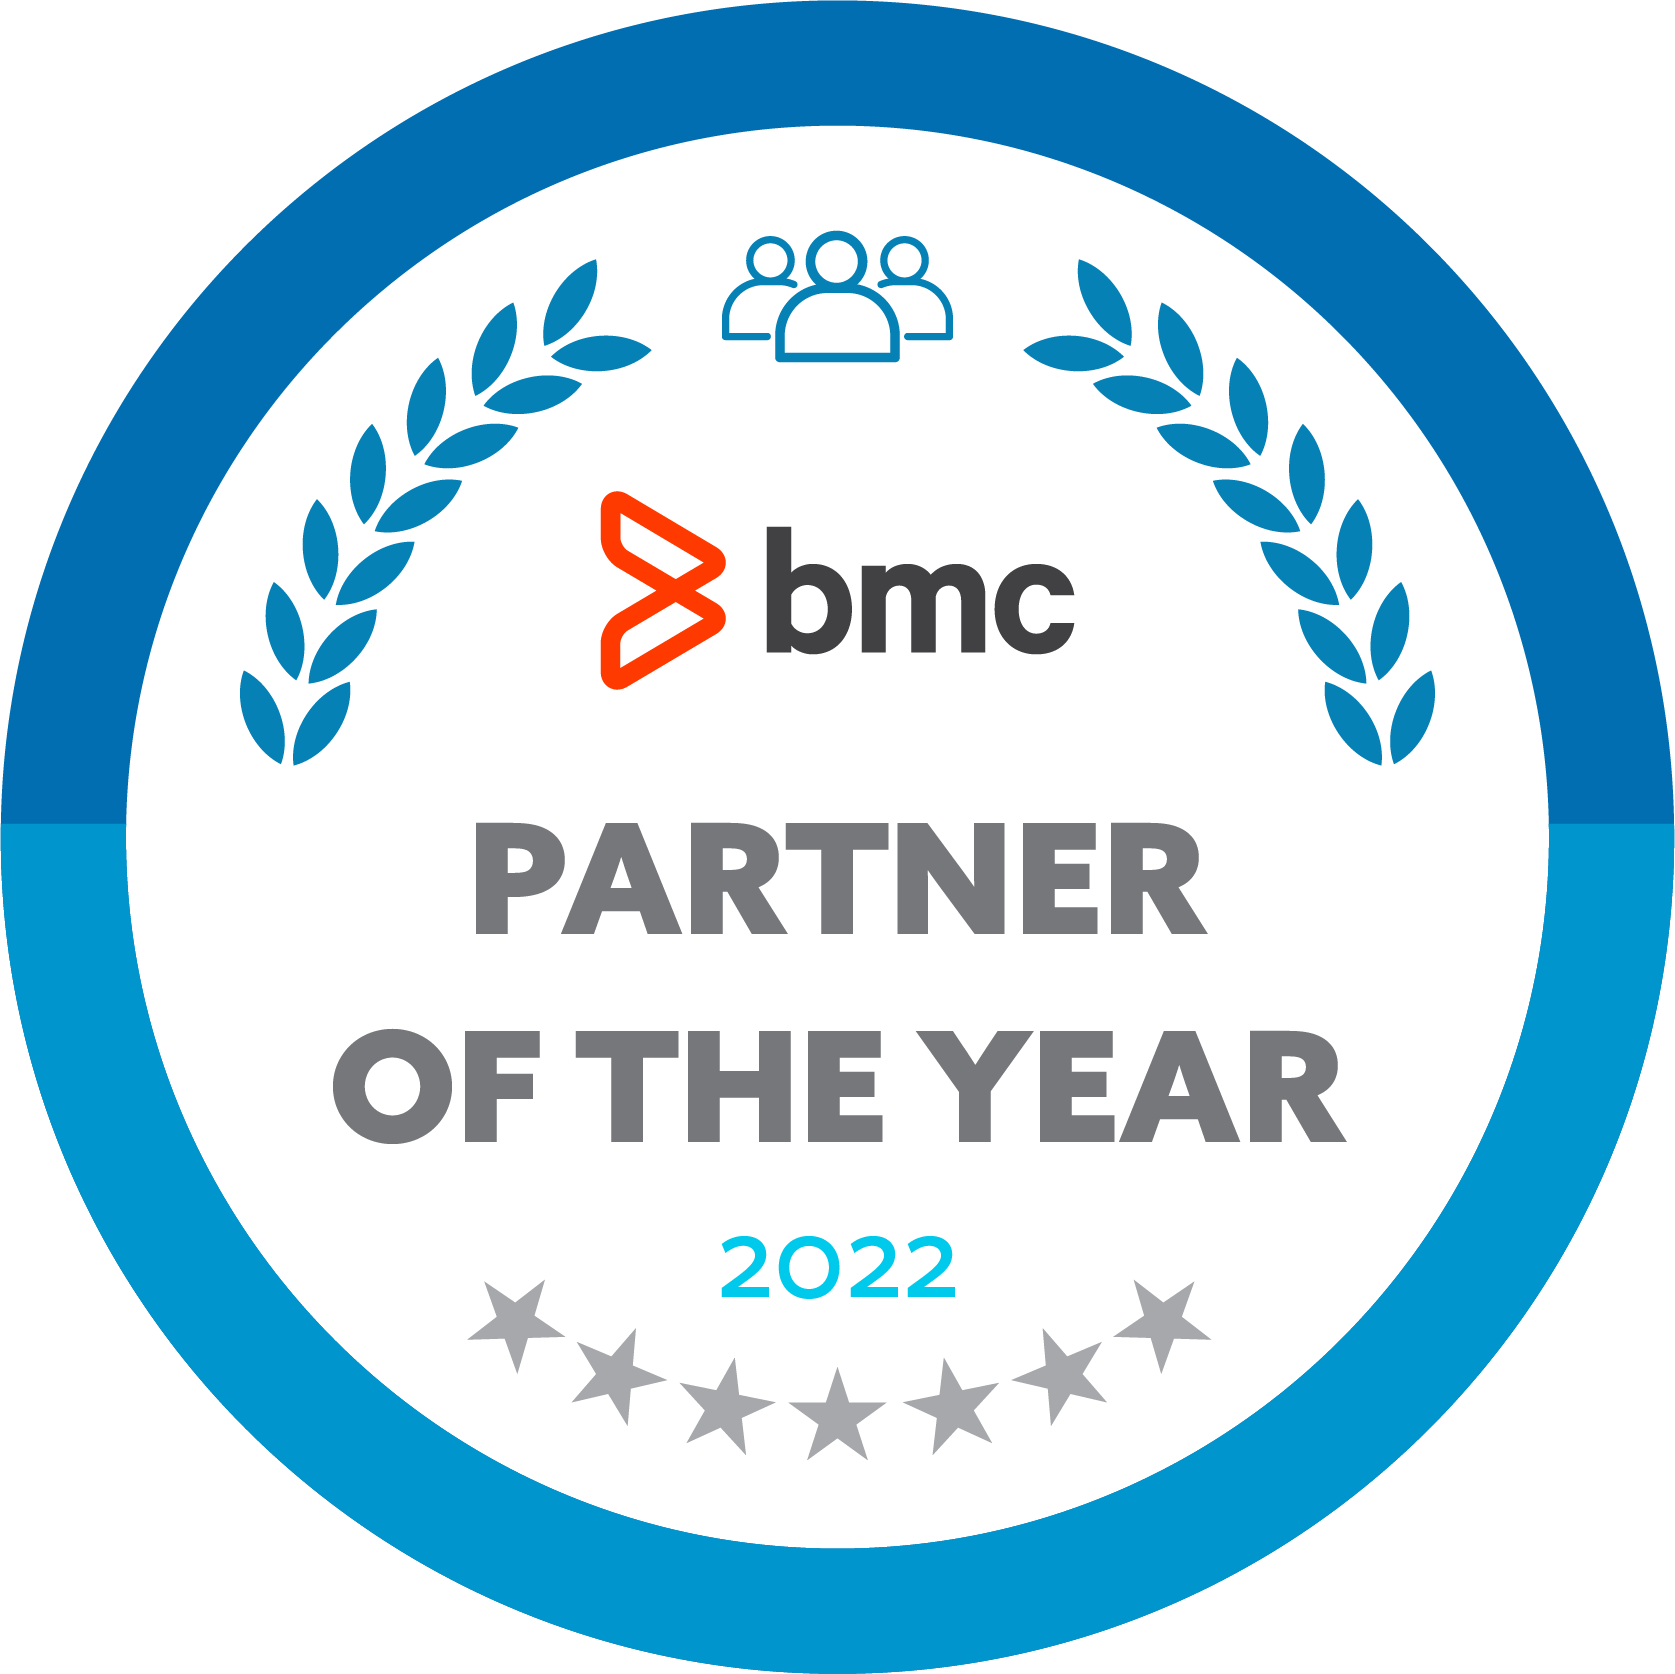 XTIVIA BMC IT Service Management Services, Software & Solutions for BMC Client Management, Discovery, Helix, Remedy ITSM, and Remedyforce partner of the year